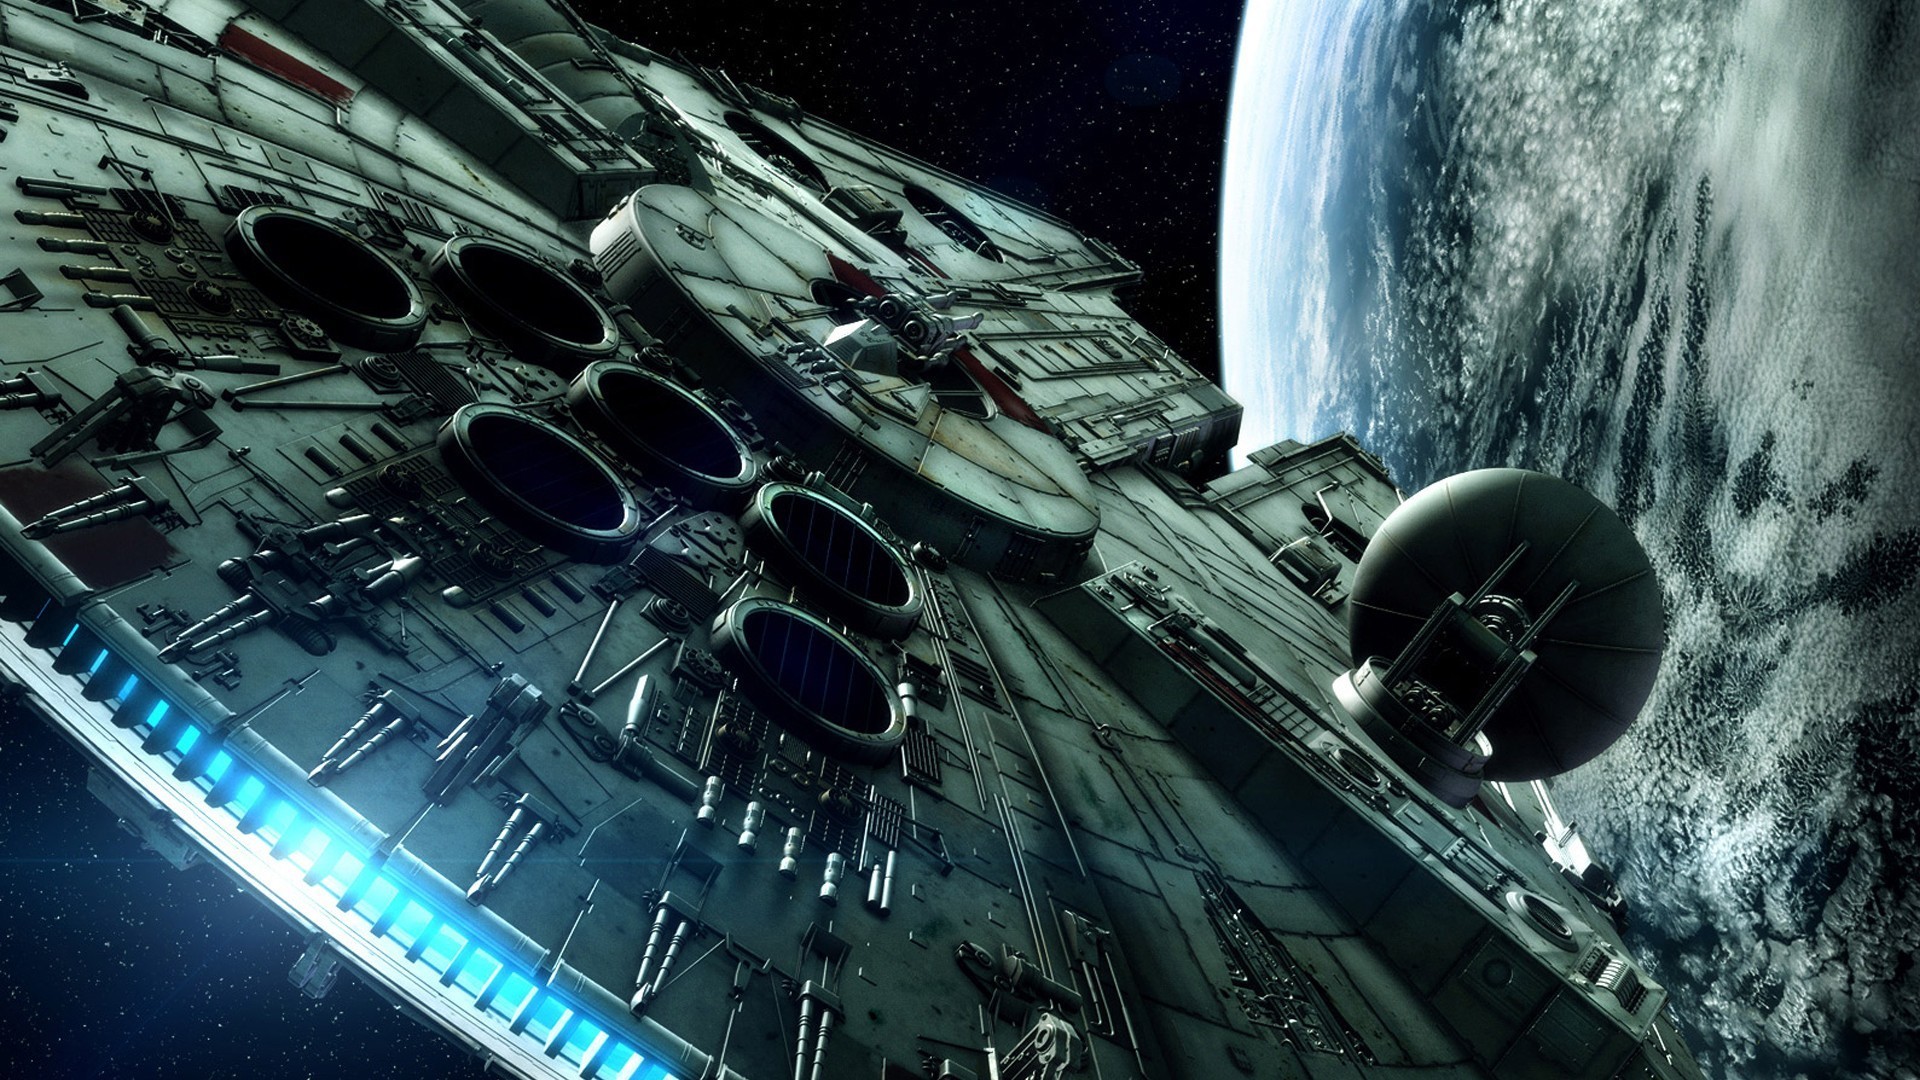 1920x1080 Awesome Star Wars Wallpaper 45246